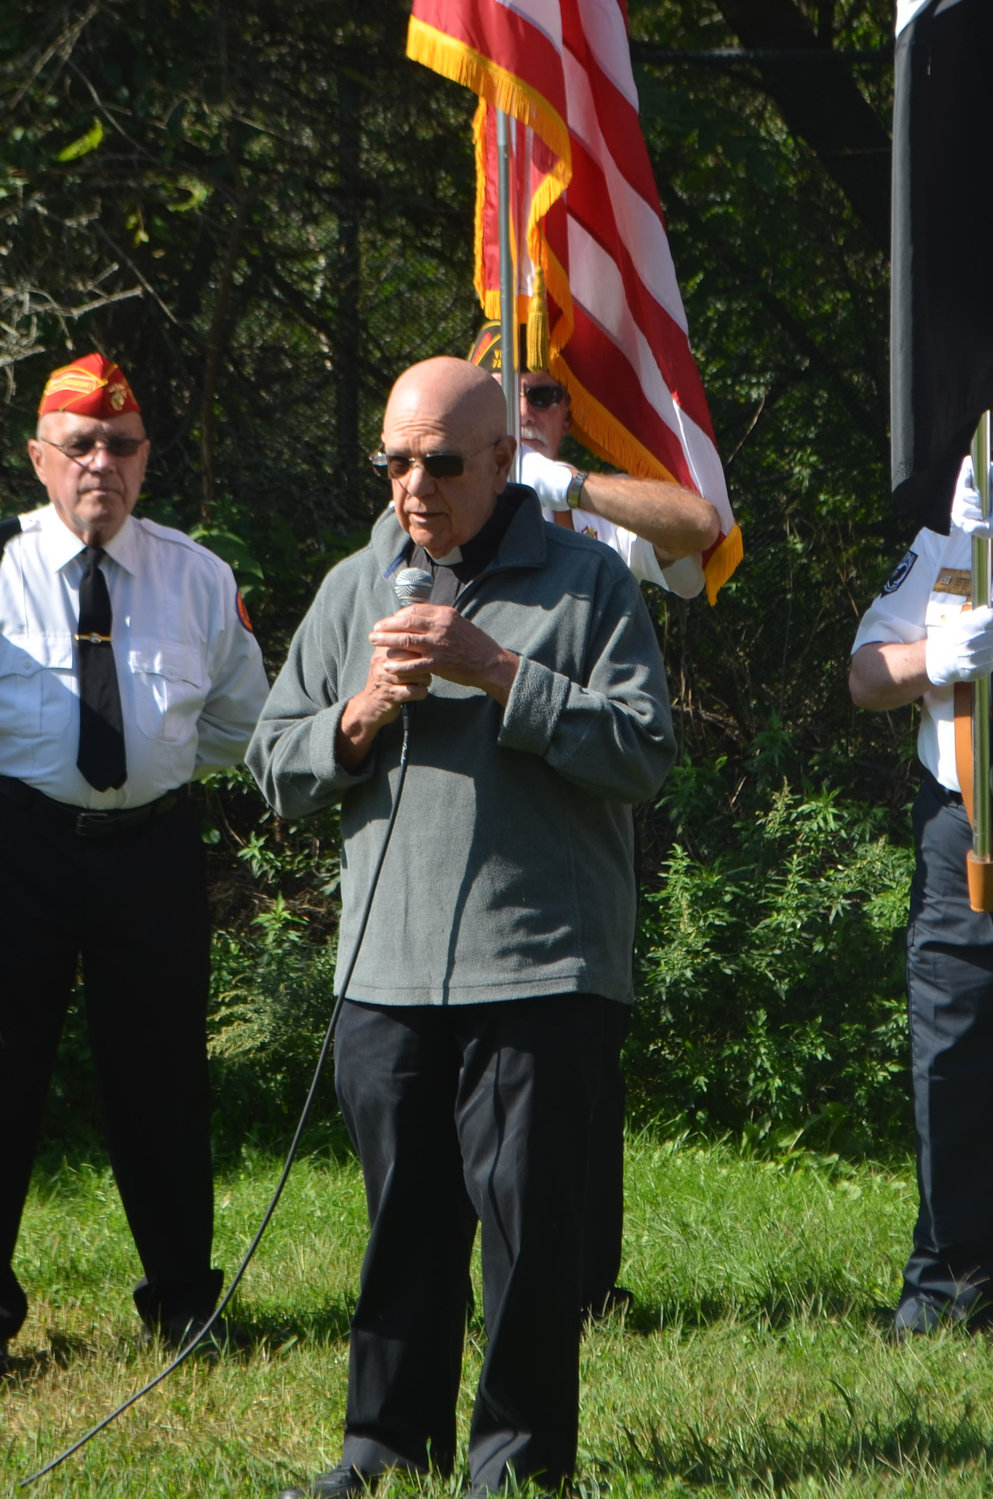 Pastor Bruce Anspach gives a closing prayer at the Town of Delaware September 11 memorial.